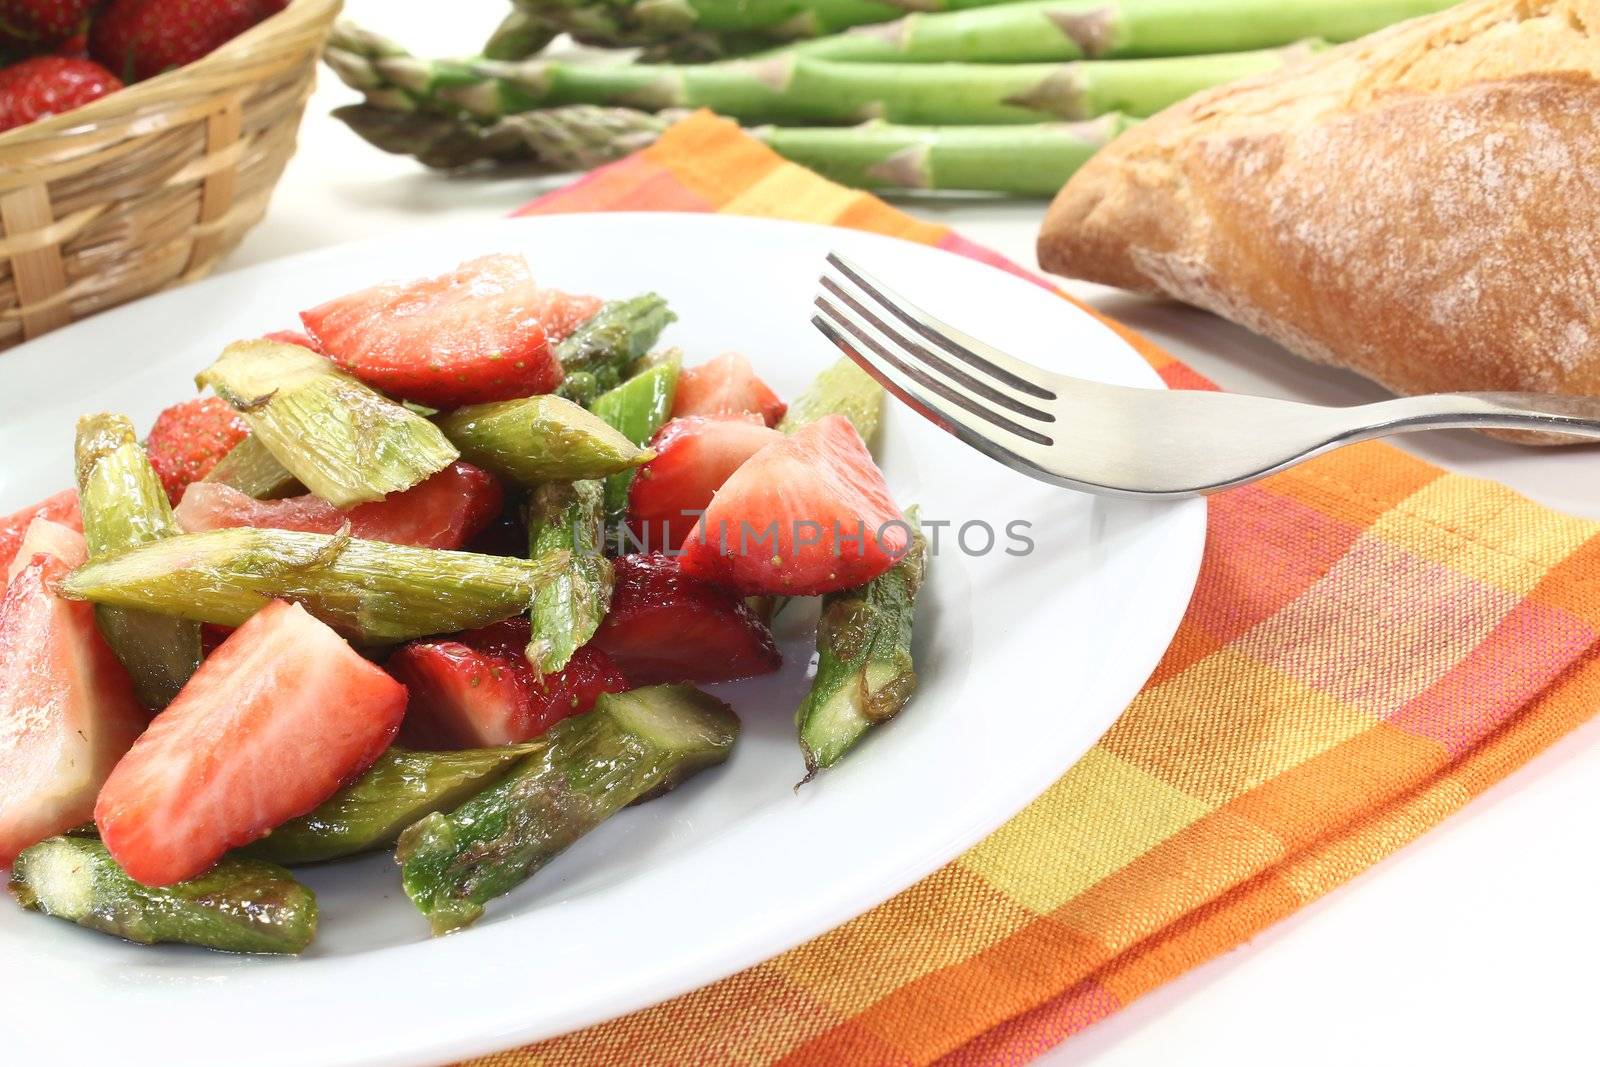 Asparagus salad by discovery